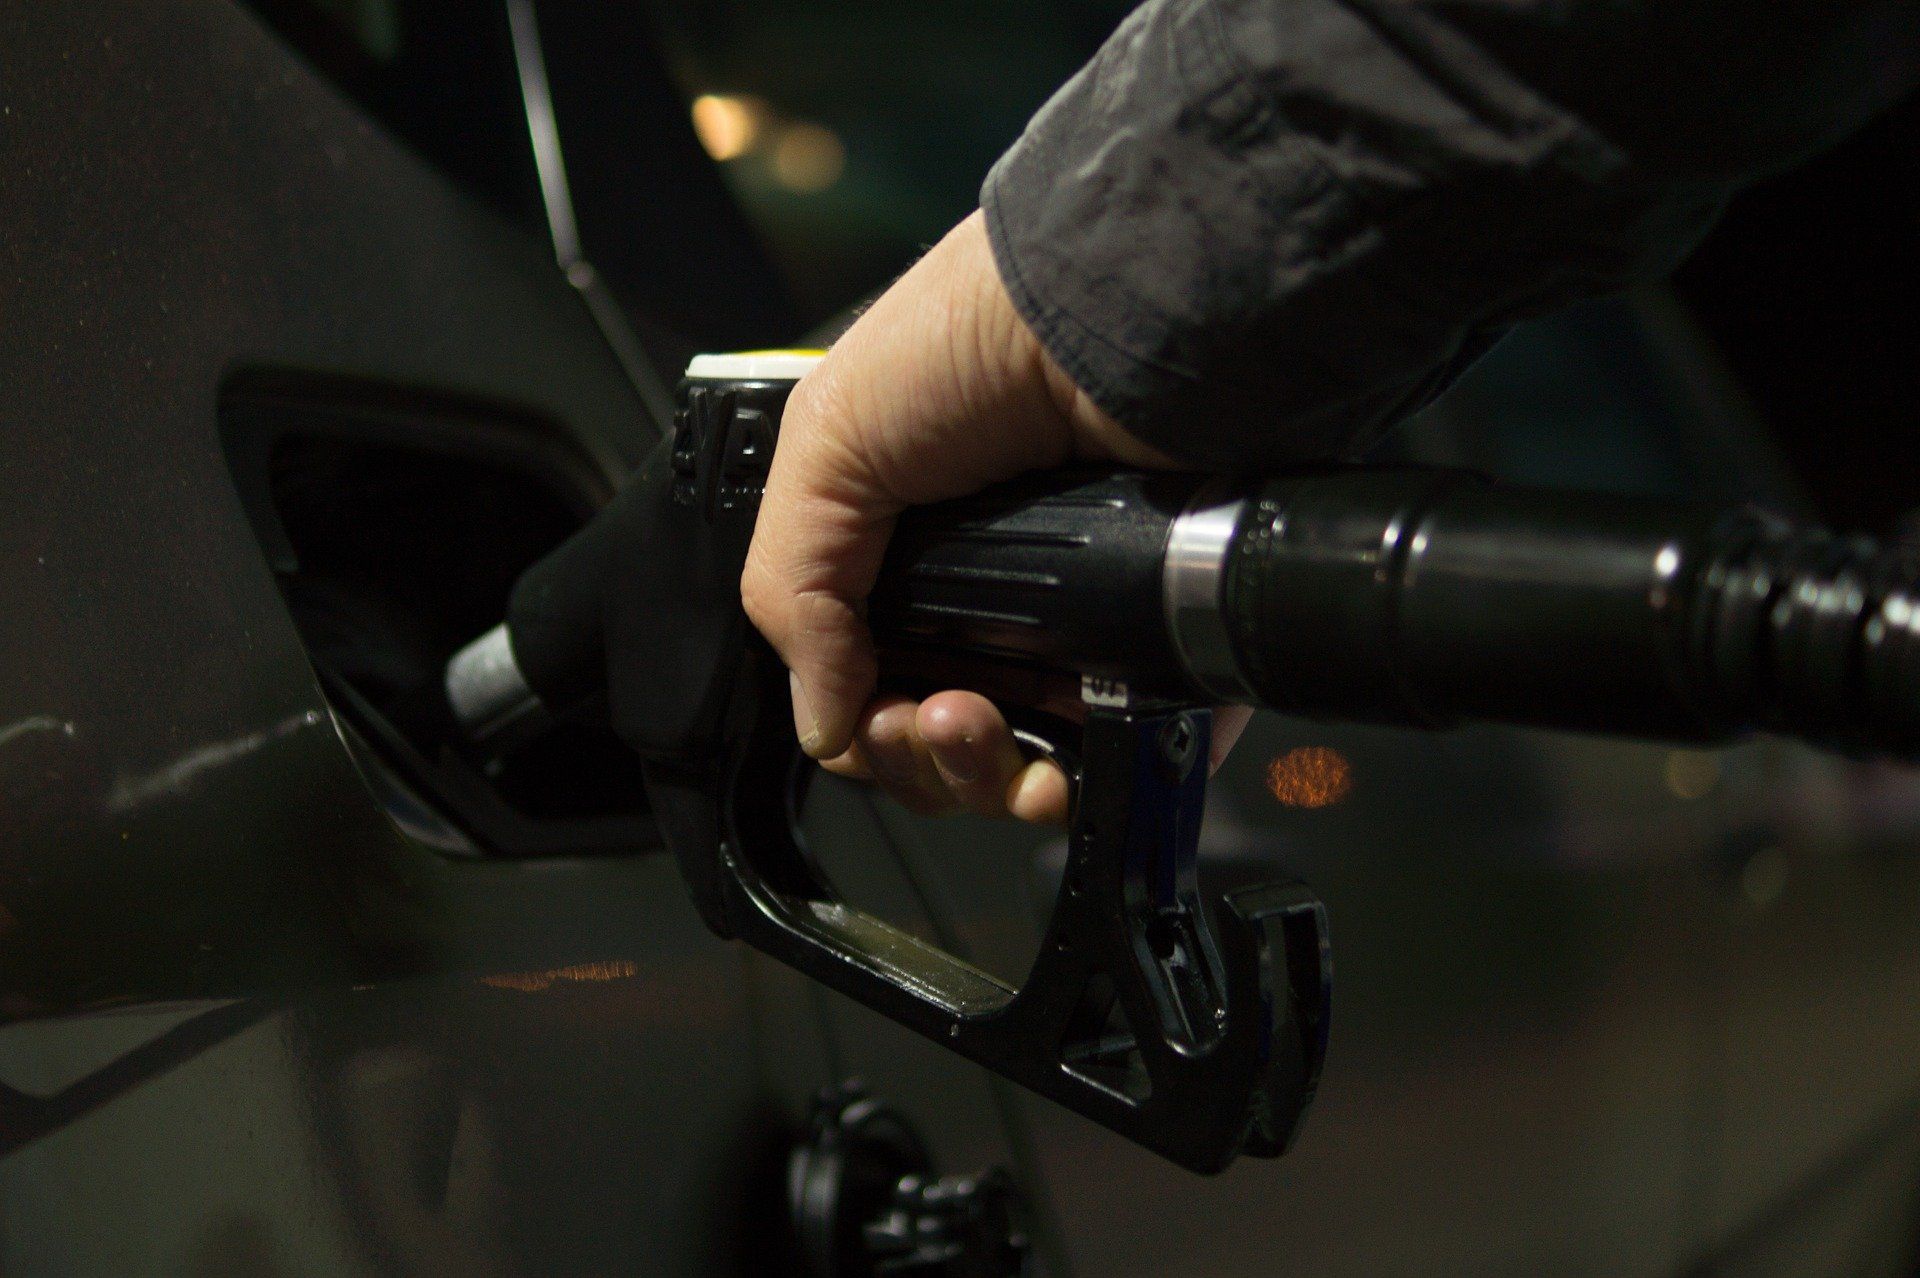 Fuel prices today: Petrol priced at Rs 95.41, diesel Rs 86.67 in Delhi on January 12, 2022